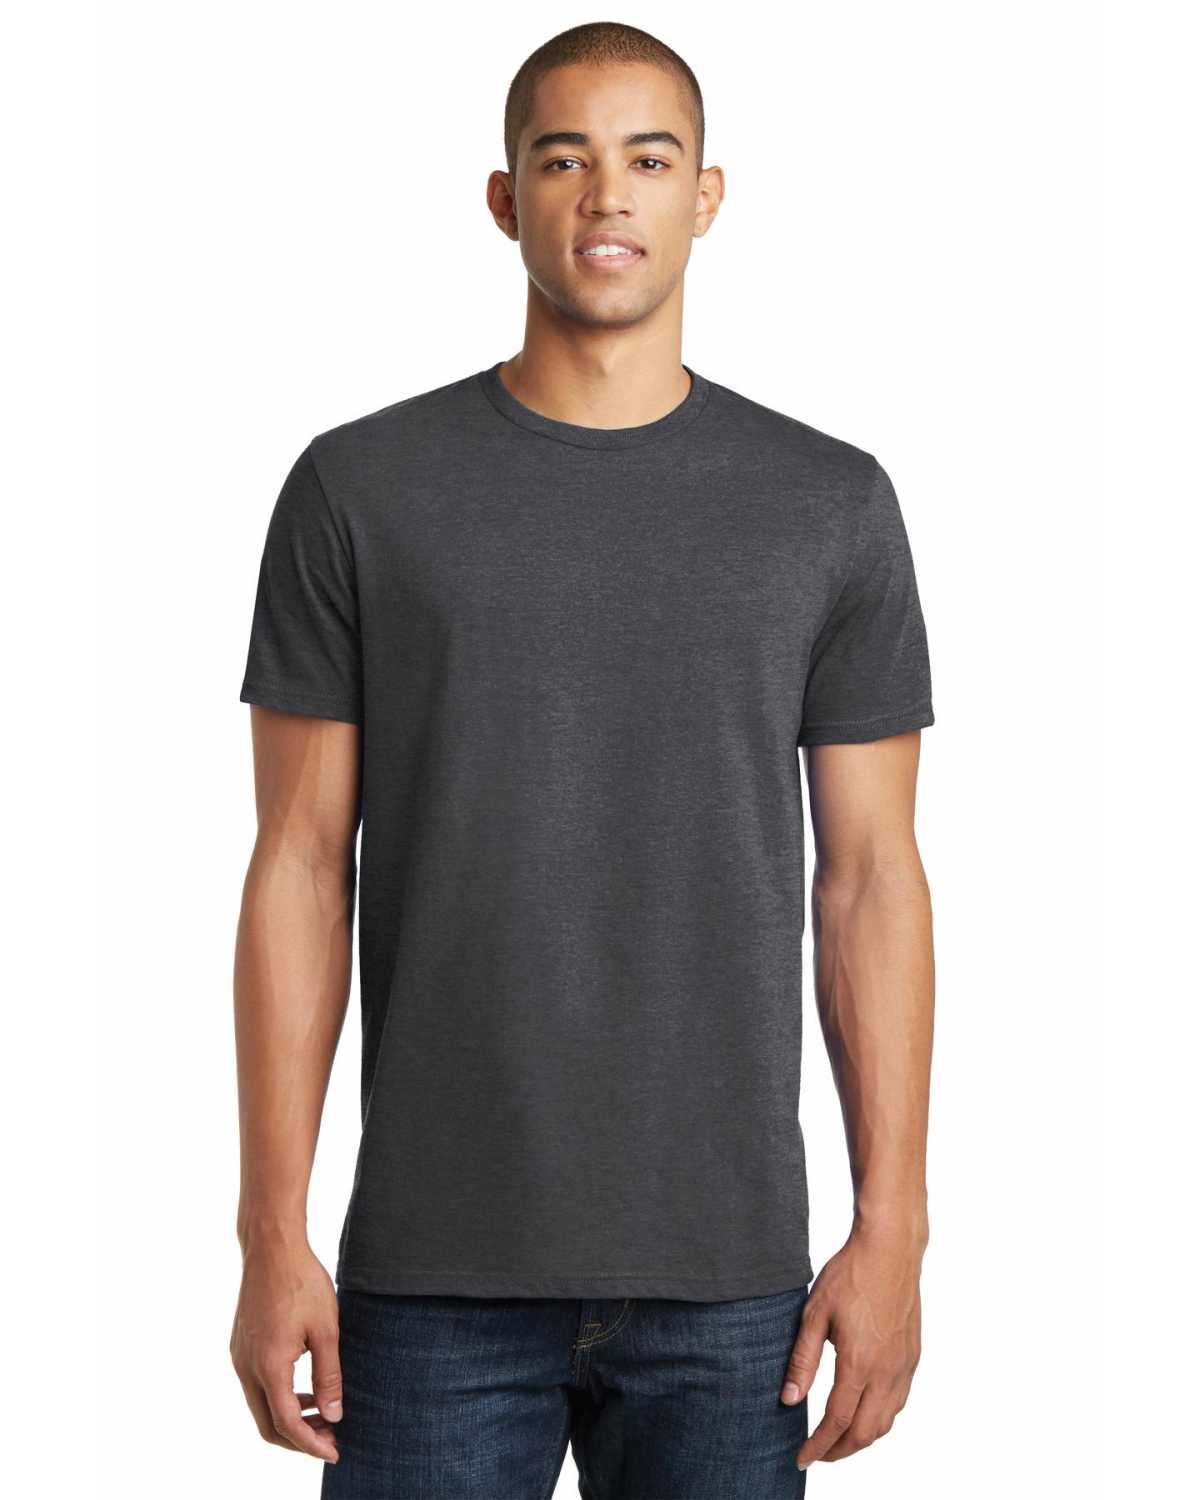 District DT5000 Young Mens The Concert Tee on discount | ApparelChoice.com